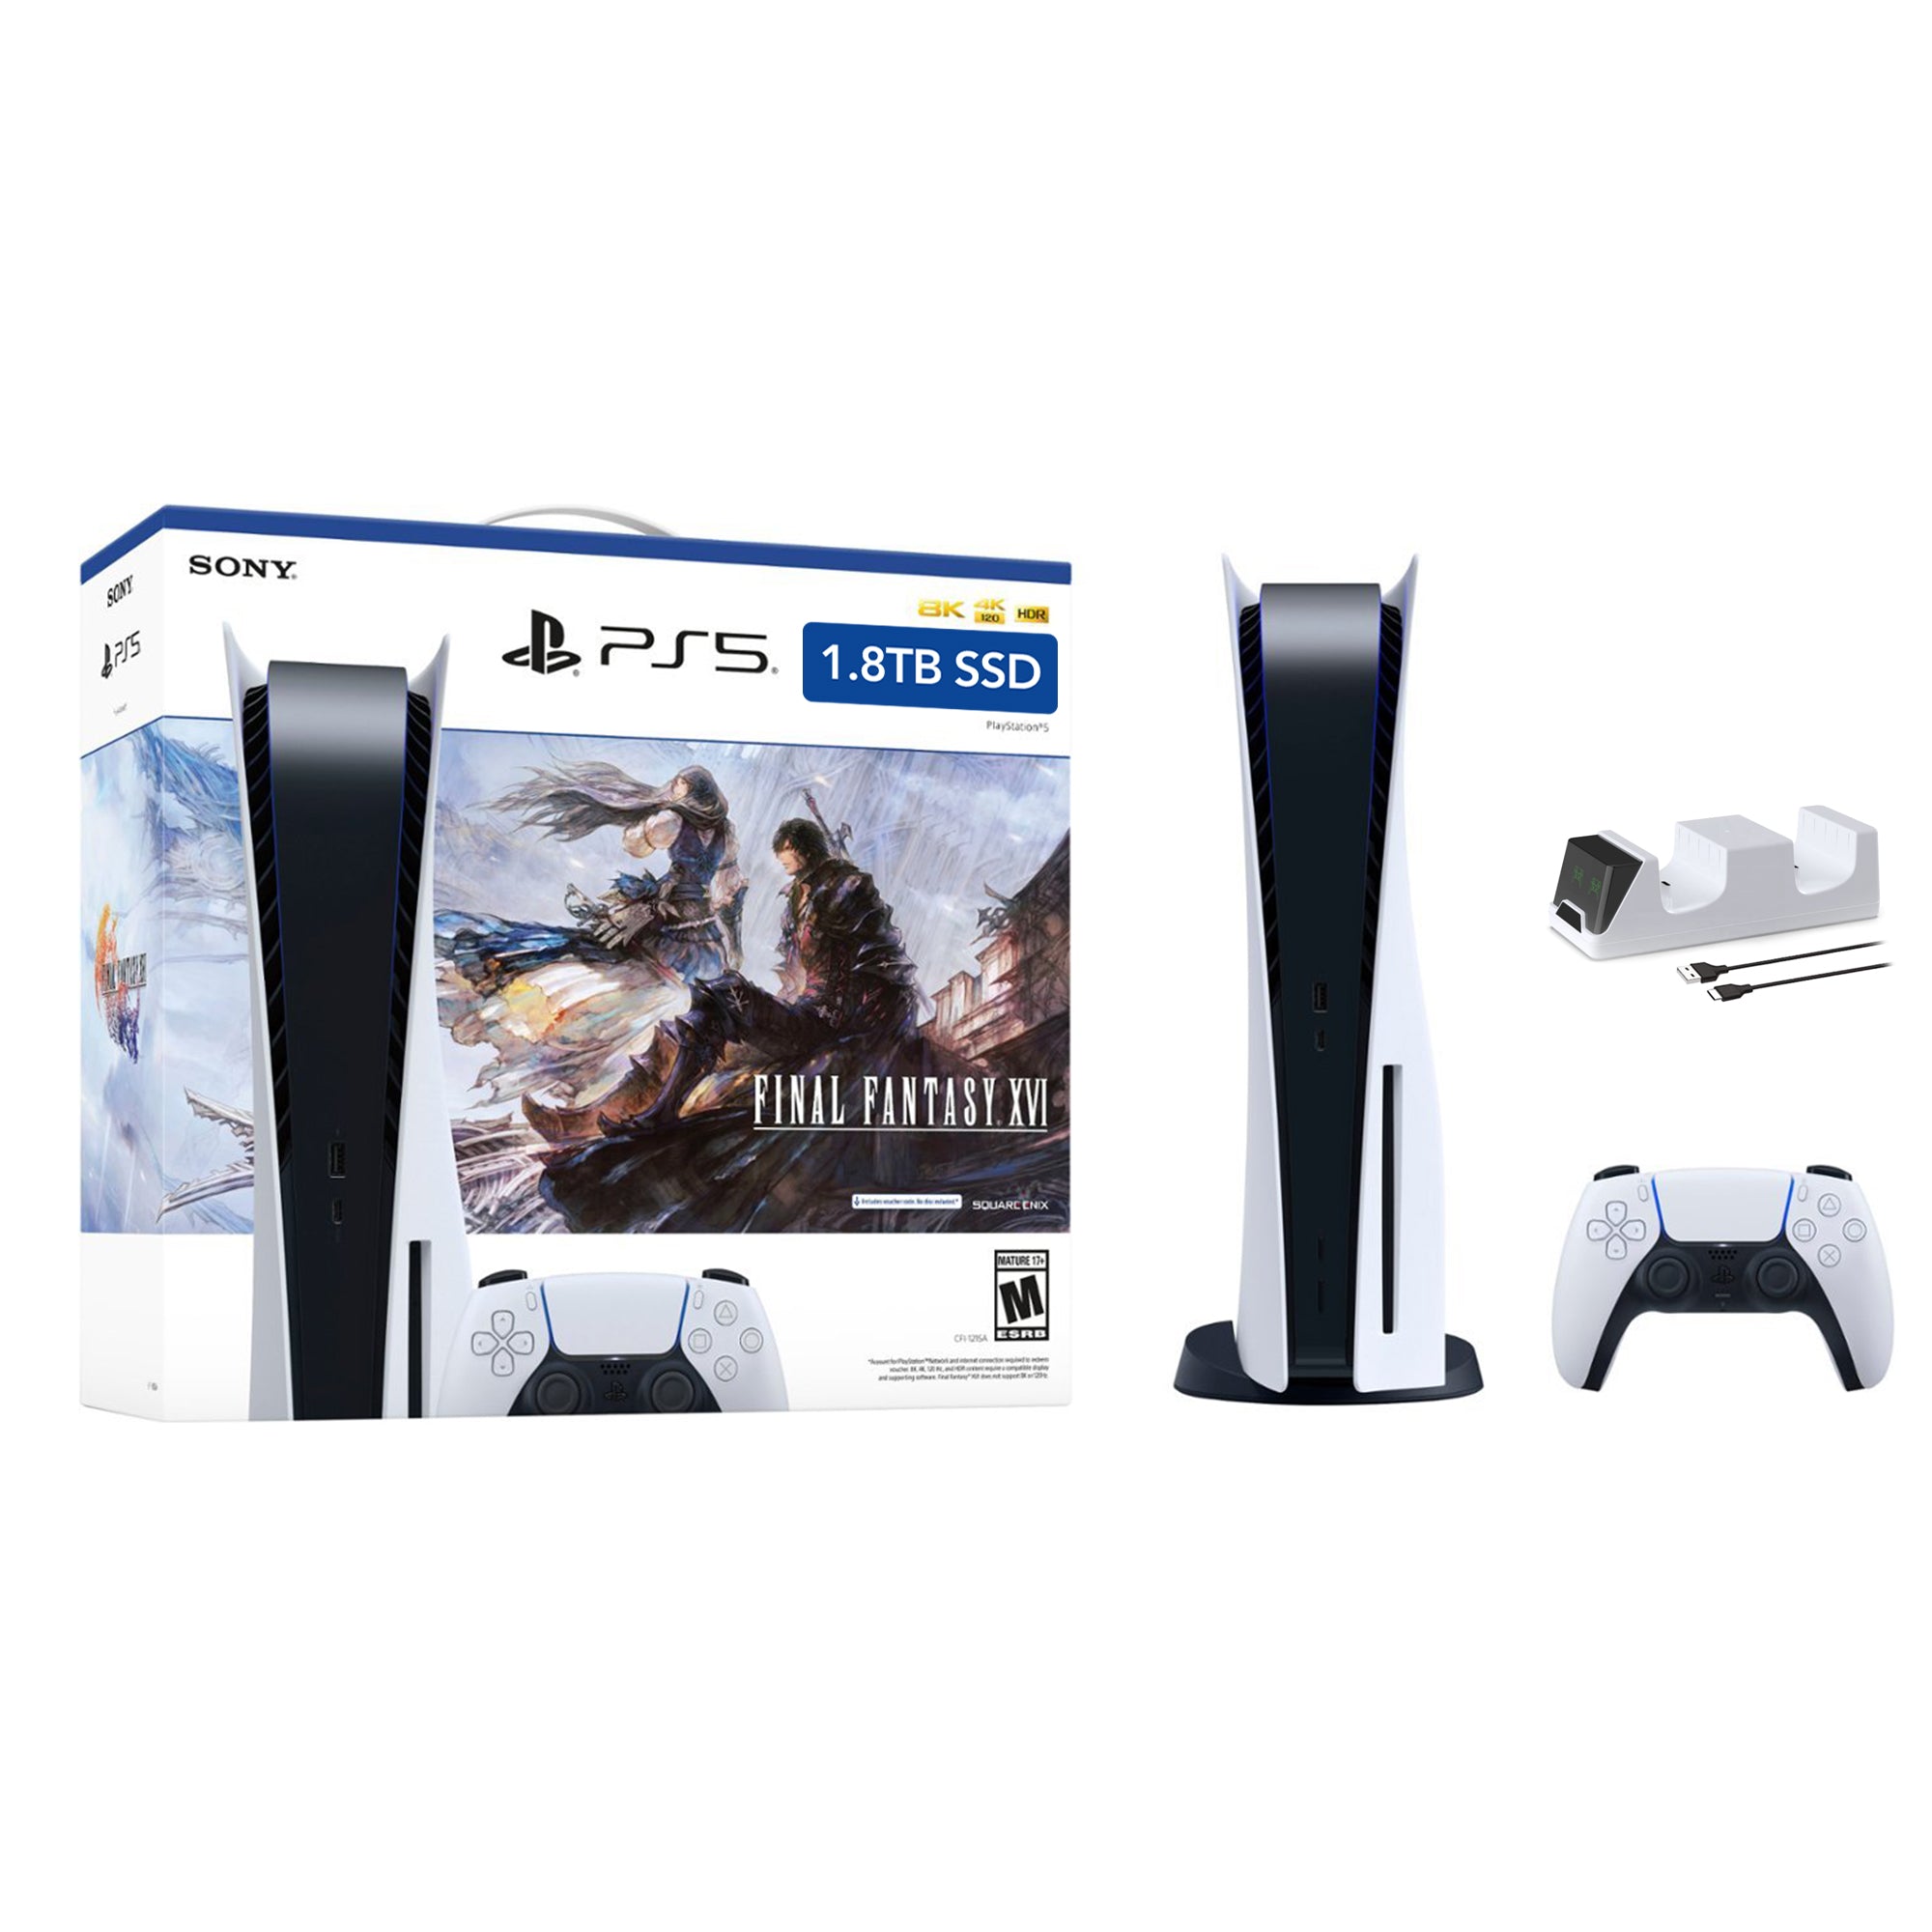 PlayStation 5 Upgraded 1.8TB Disc Edition FINAL FANTASY XVI Bundle and Mytrix Controller Charger - White, PS5 Gaming Console